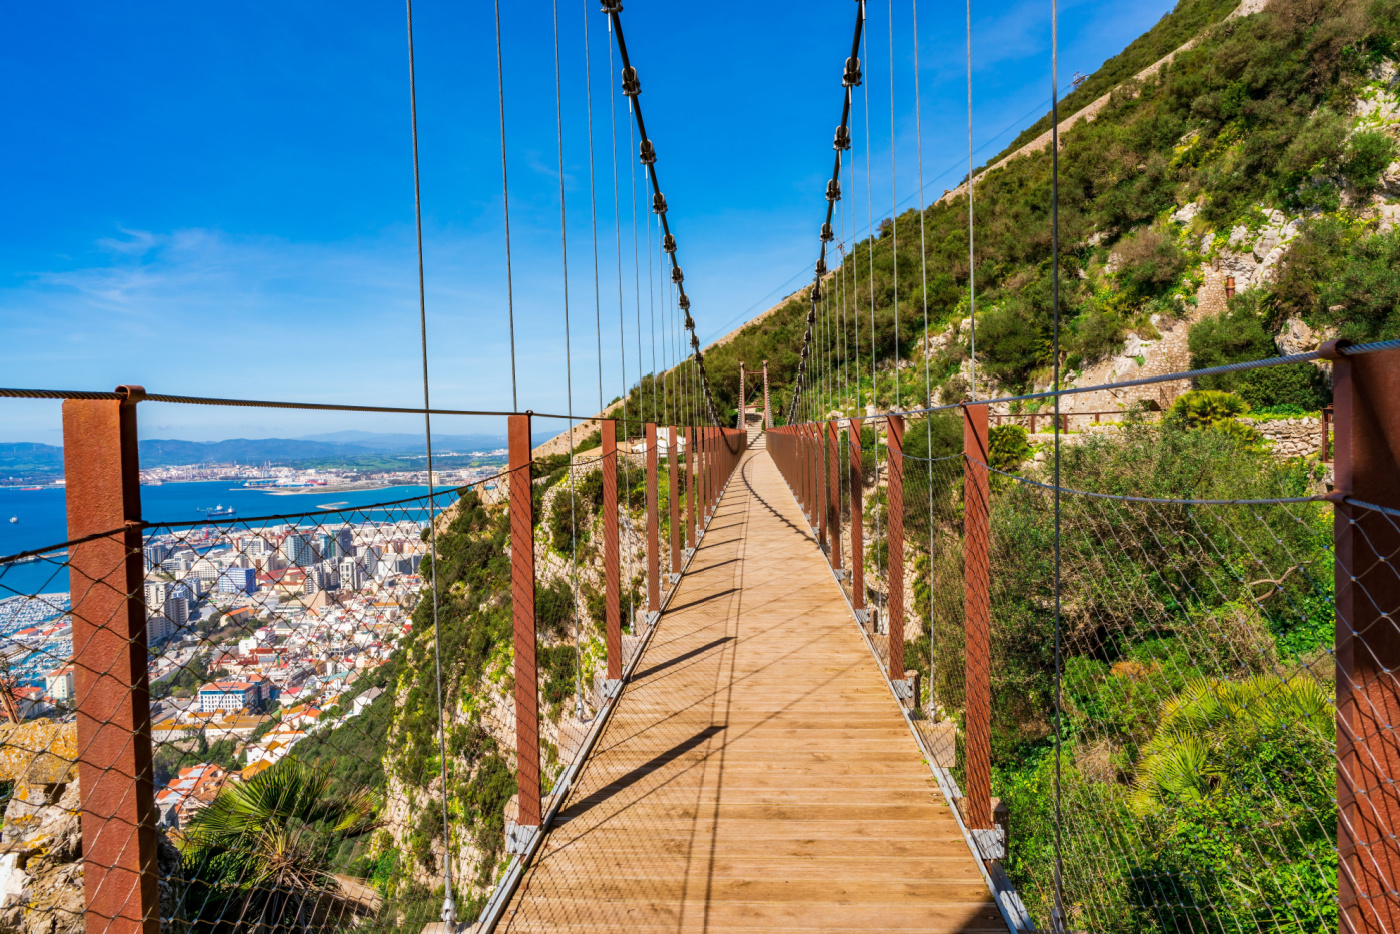 tourist attractions in gibraltar